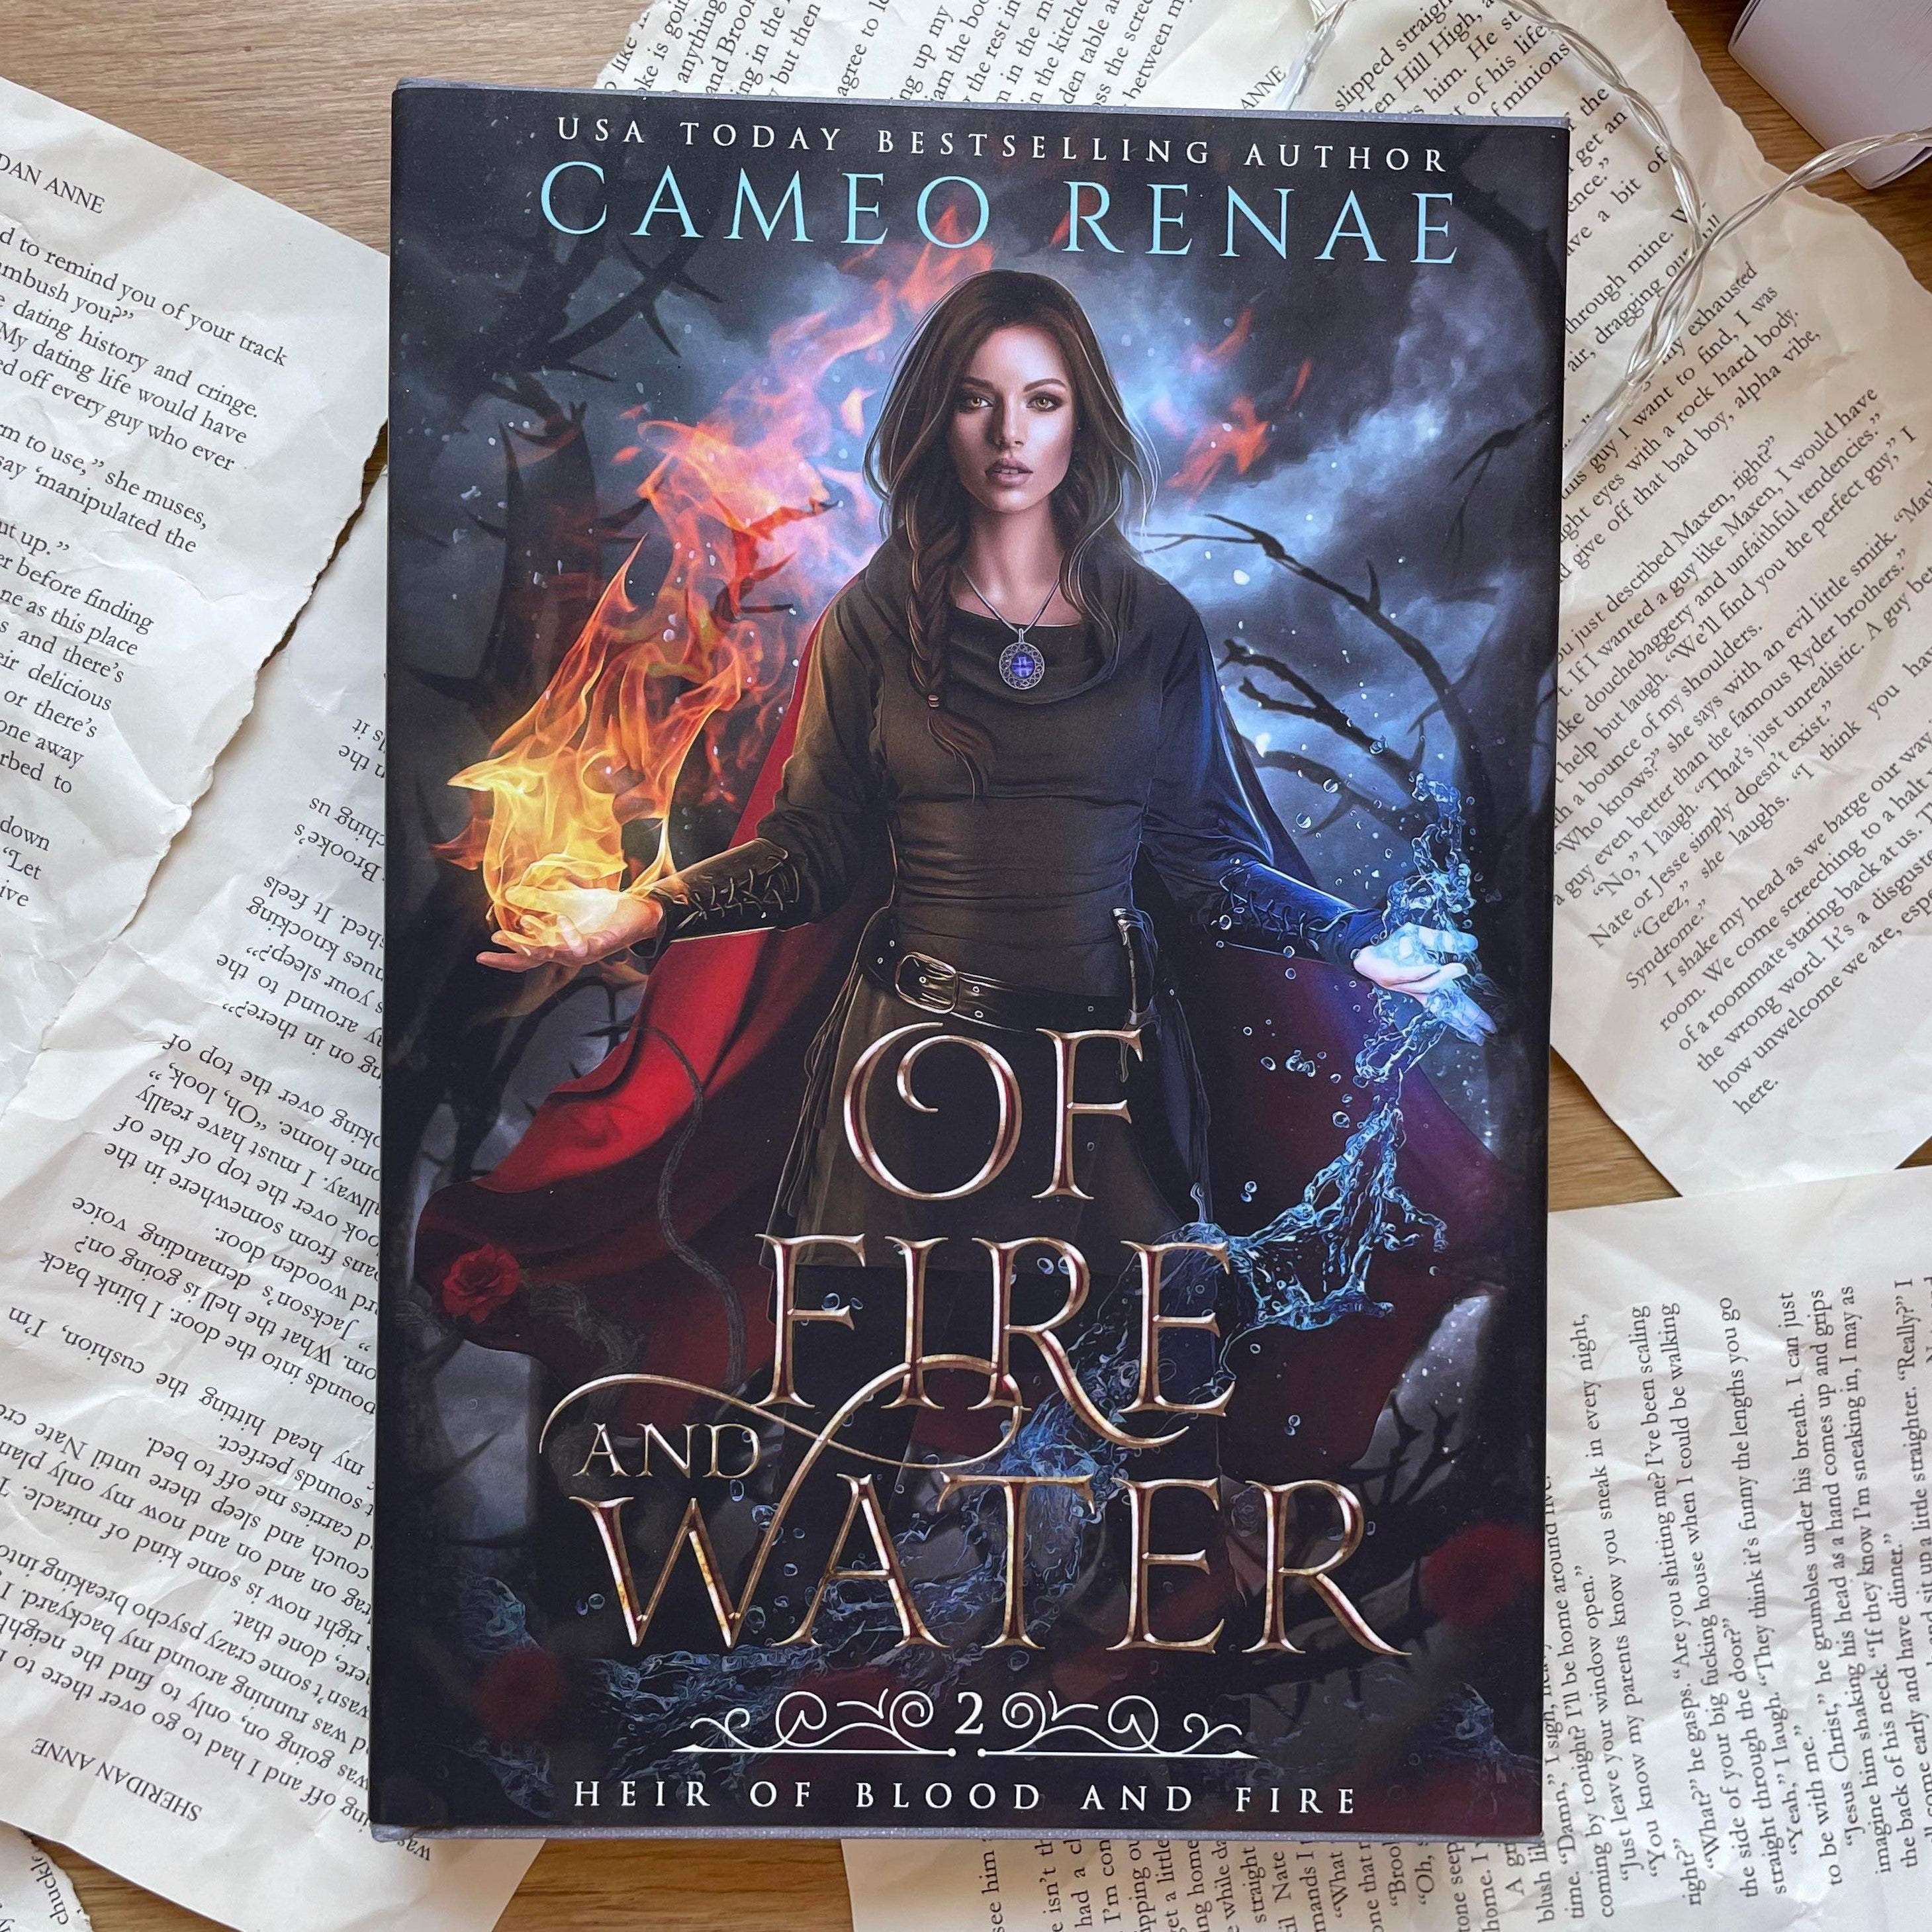 Heir of Blood and Fire series: HARDCOVERS by Cameo Renae